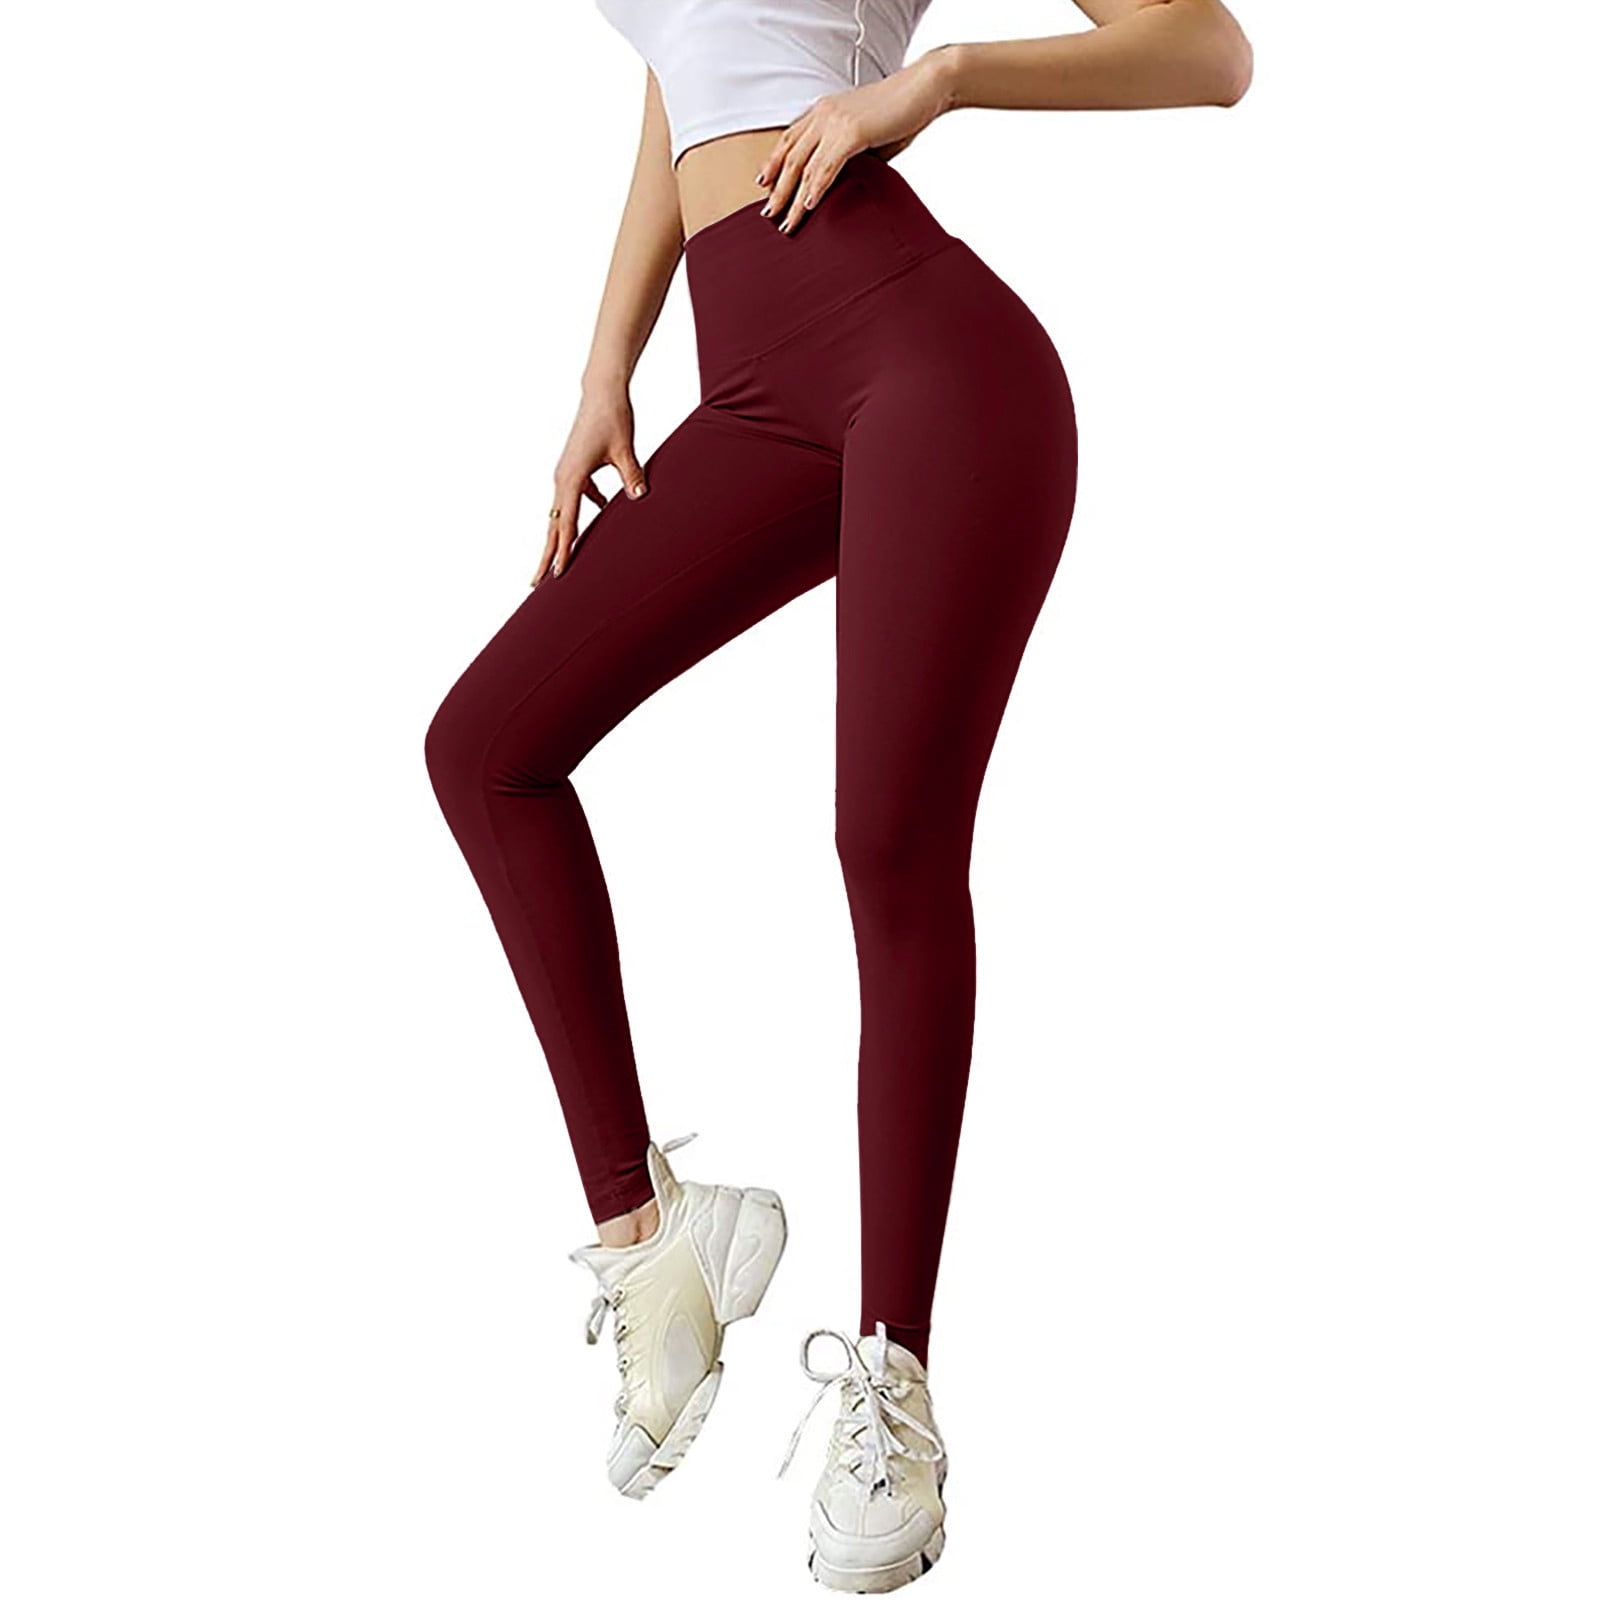 Frehsky yoga pants Fashion Ladies Pure Color Lifting Elastic Fitness  Running Yoga Pants workout leggings for women 